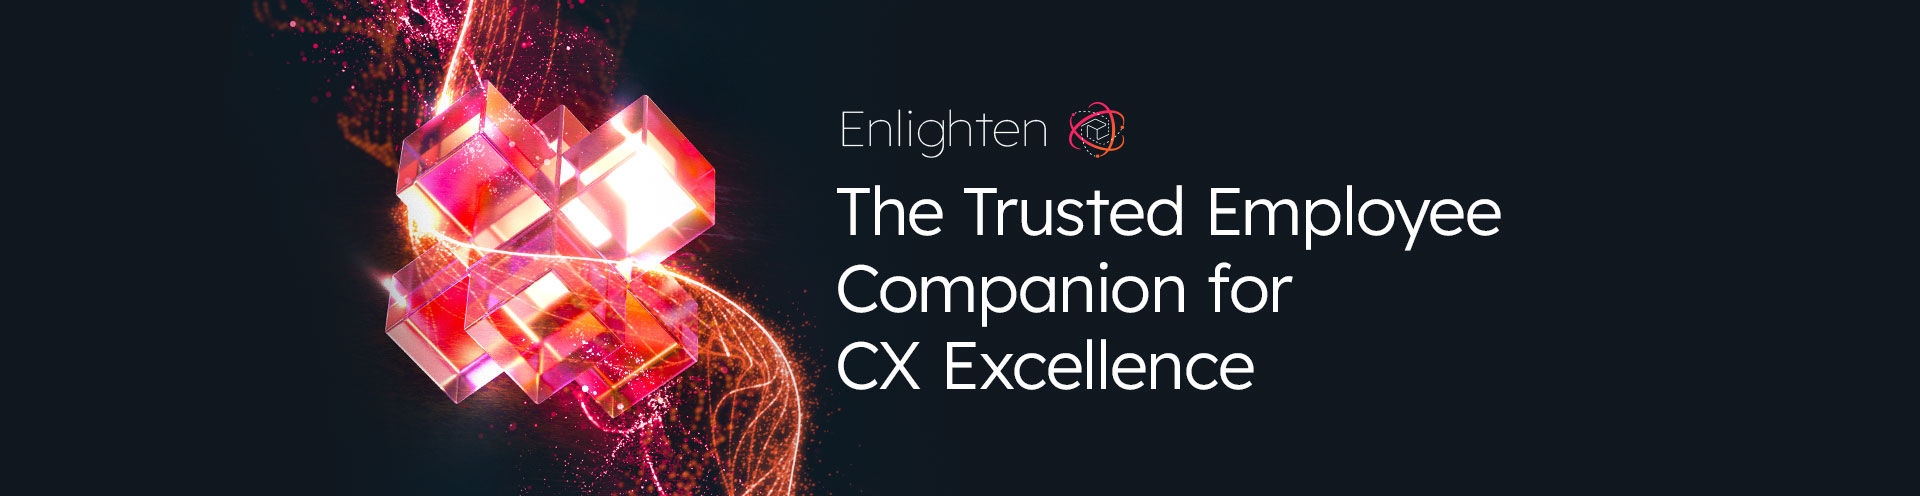 NICE Enlighten: The Trusted Employee Companion for CX Excellence